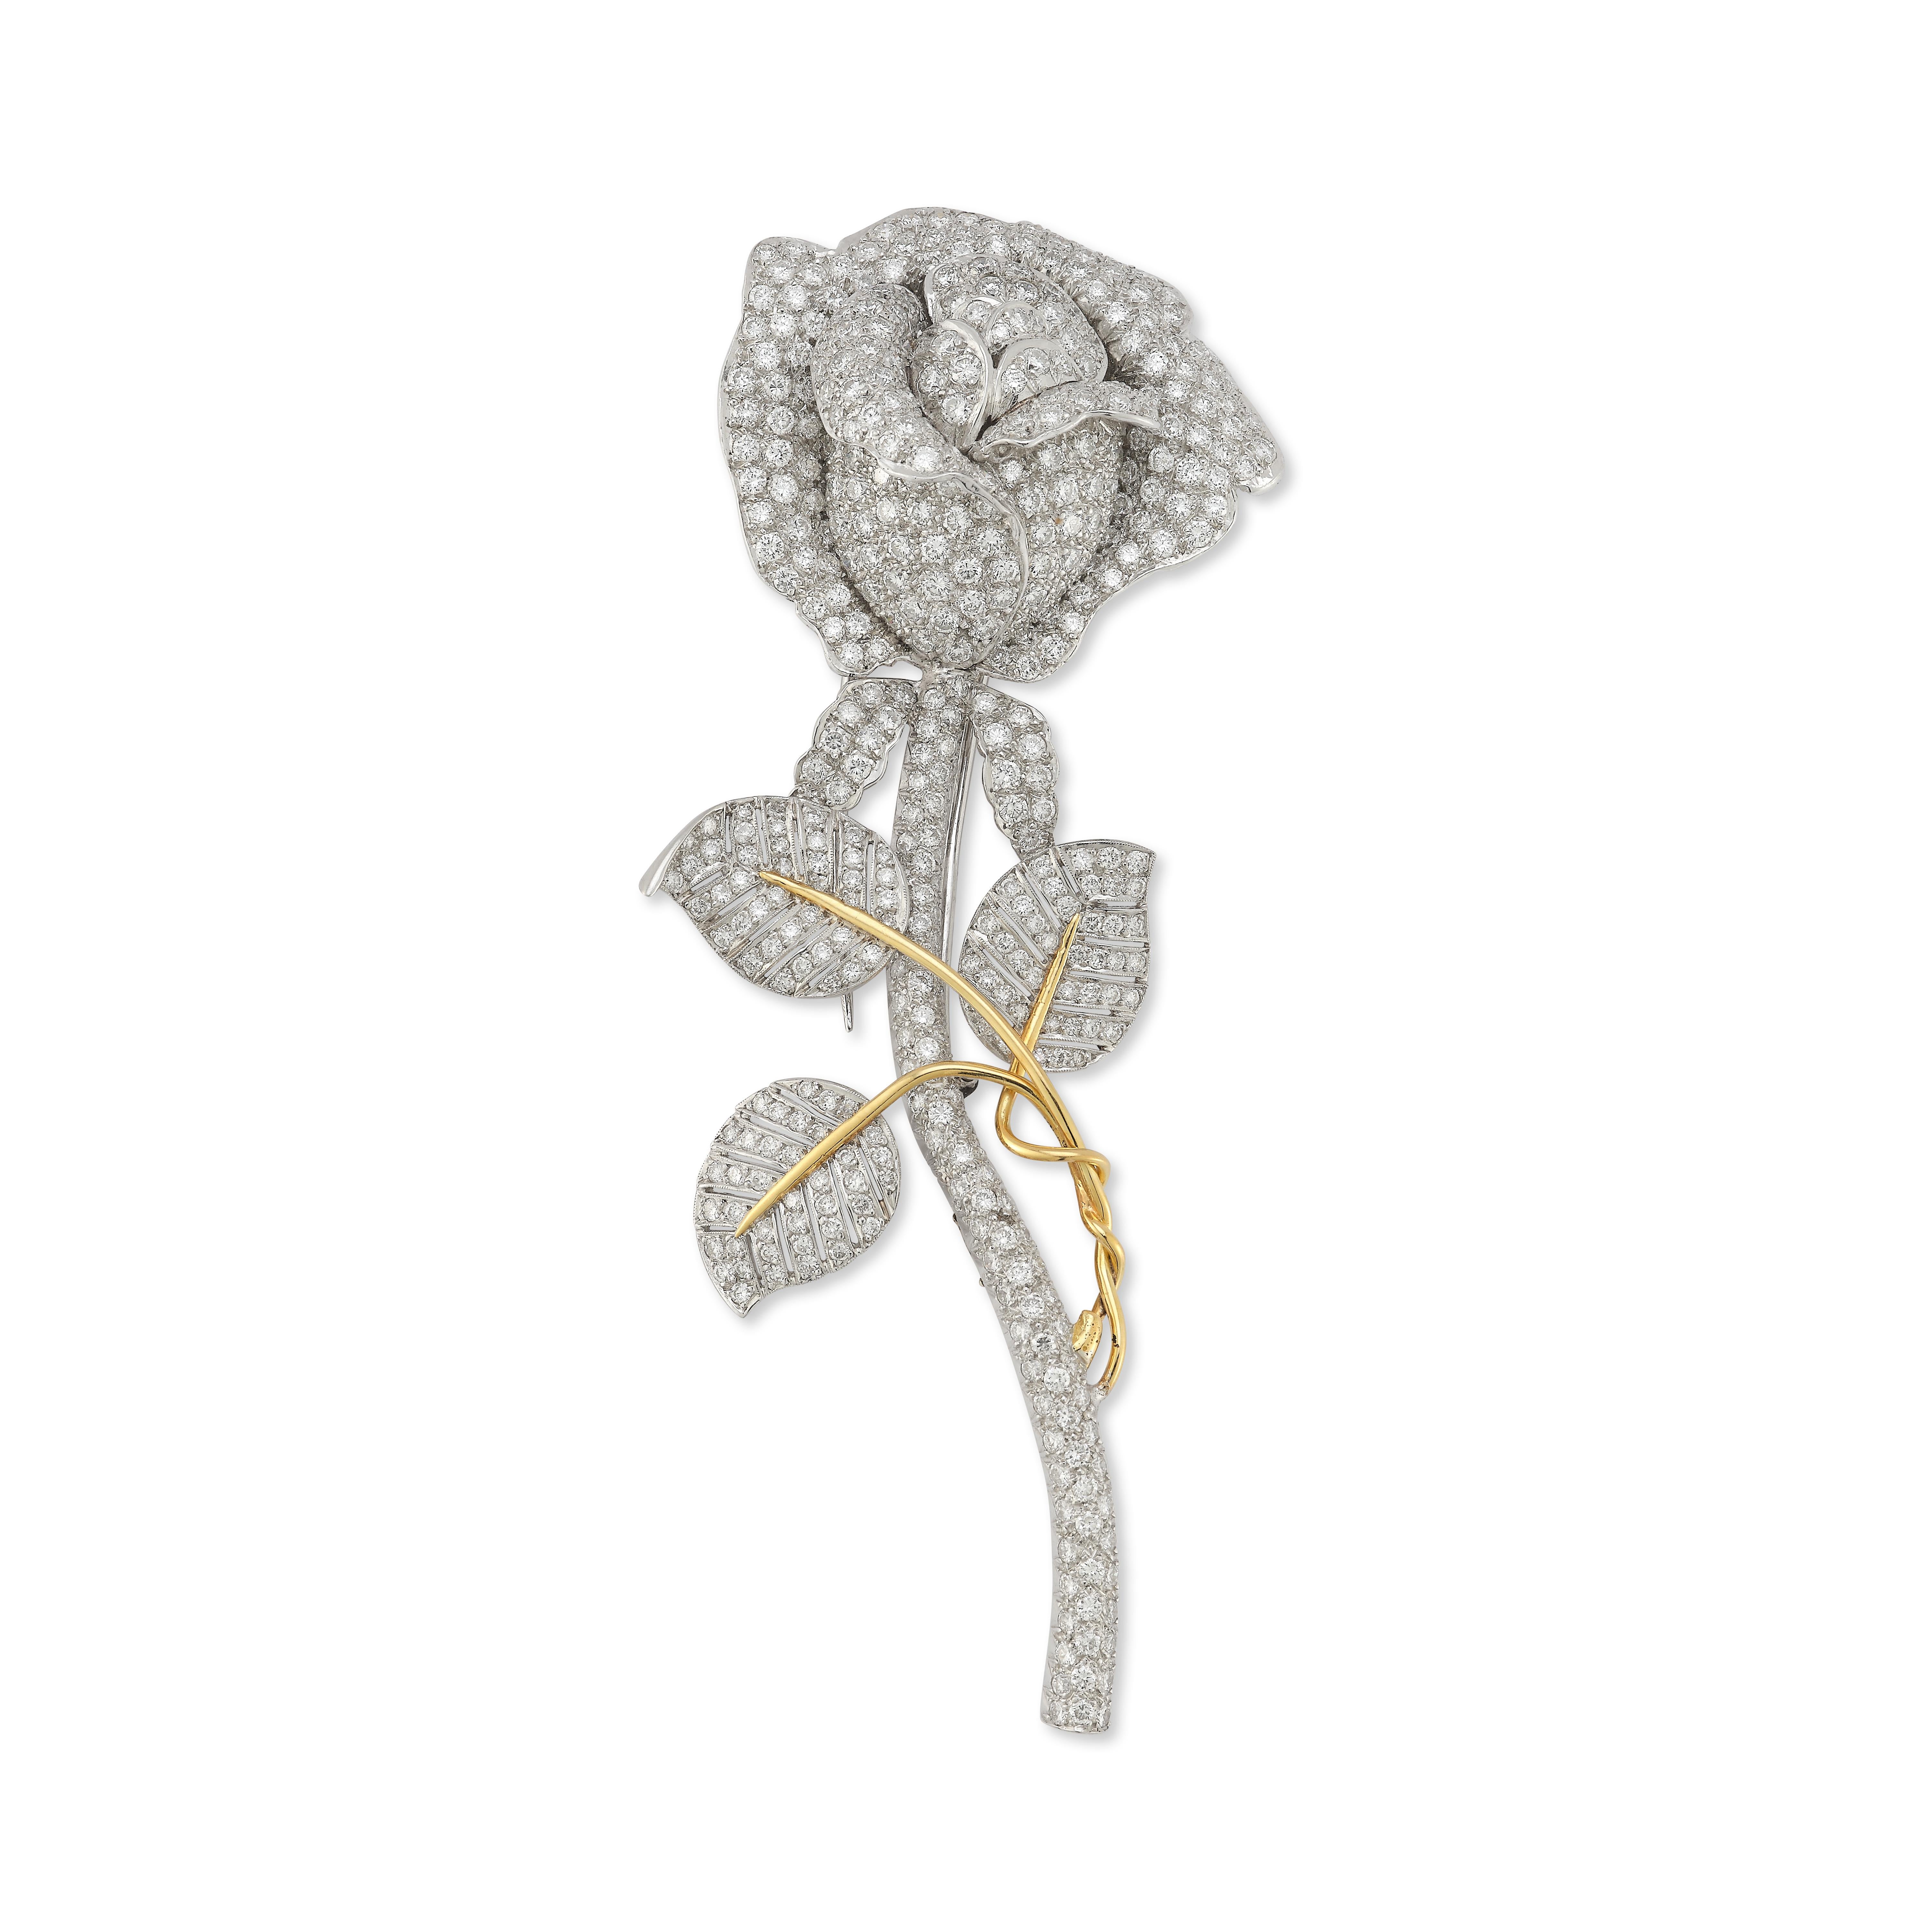 Diamond Flower Brooch

415 round diamonds approximately weighing 4.5 carat mounted in platinum and 18 karat yellow gold

Length: 4